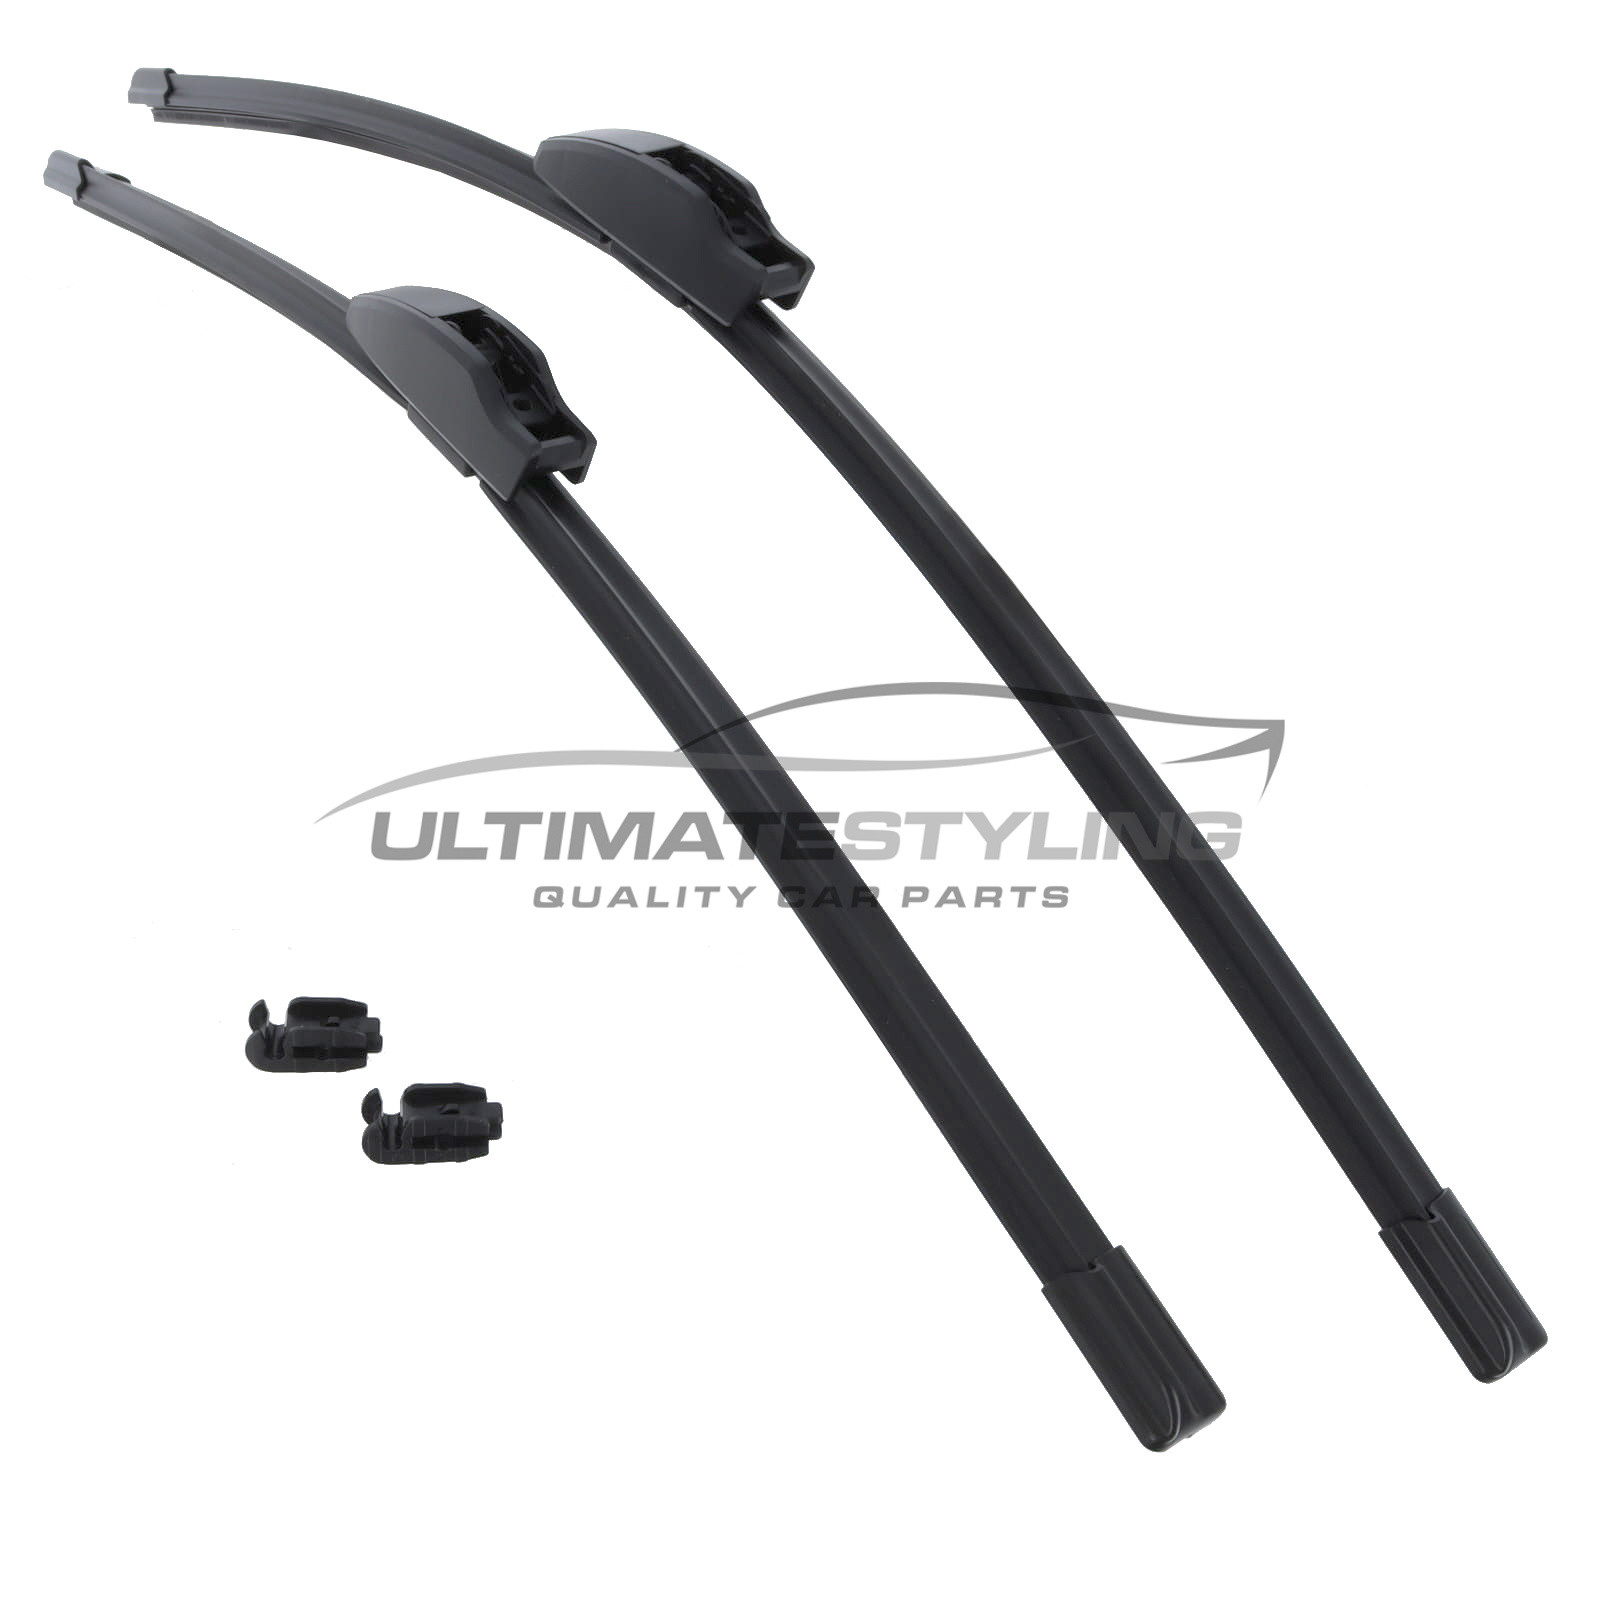 Drivers Side & Passenger Side (Front) Wiper Blades for Mitsubishi ASX